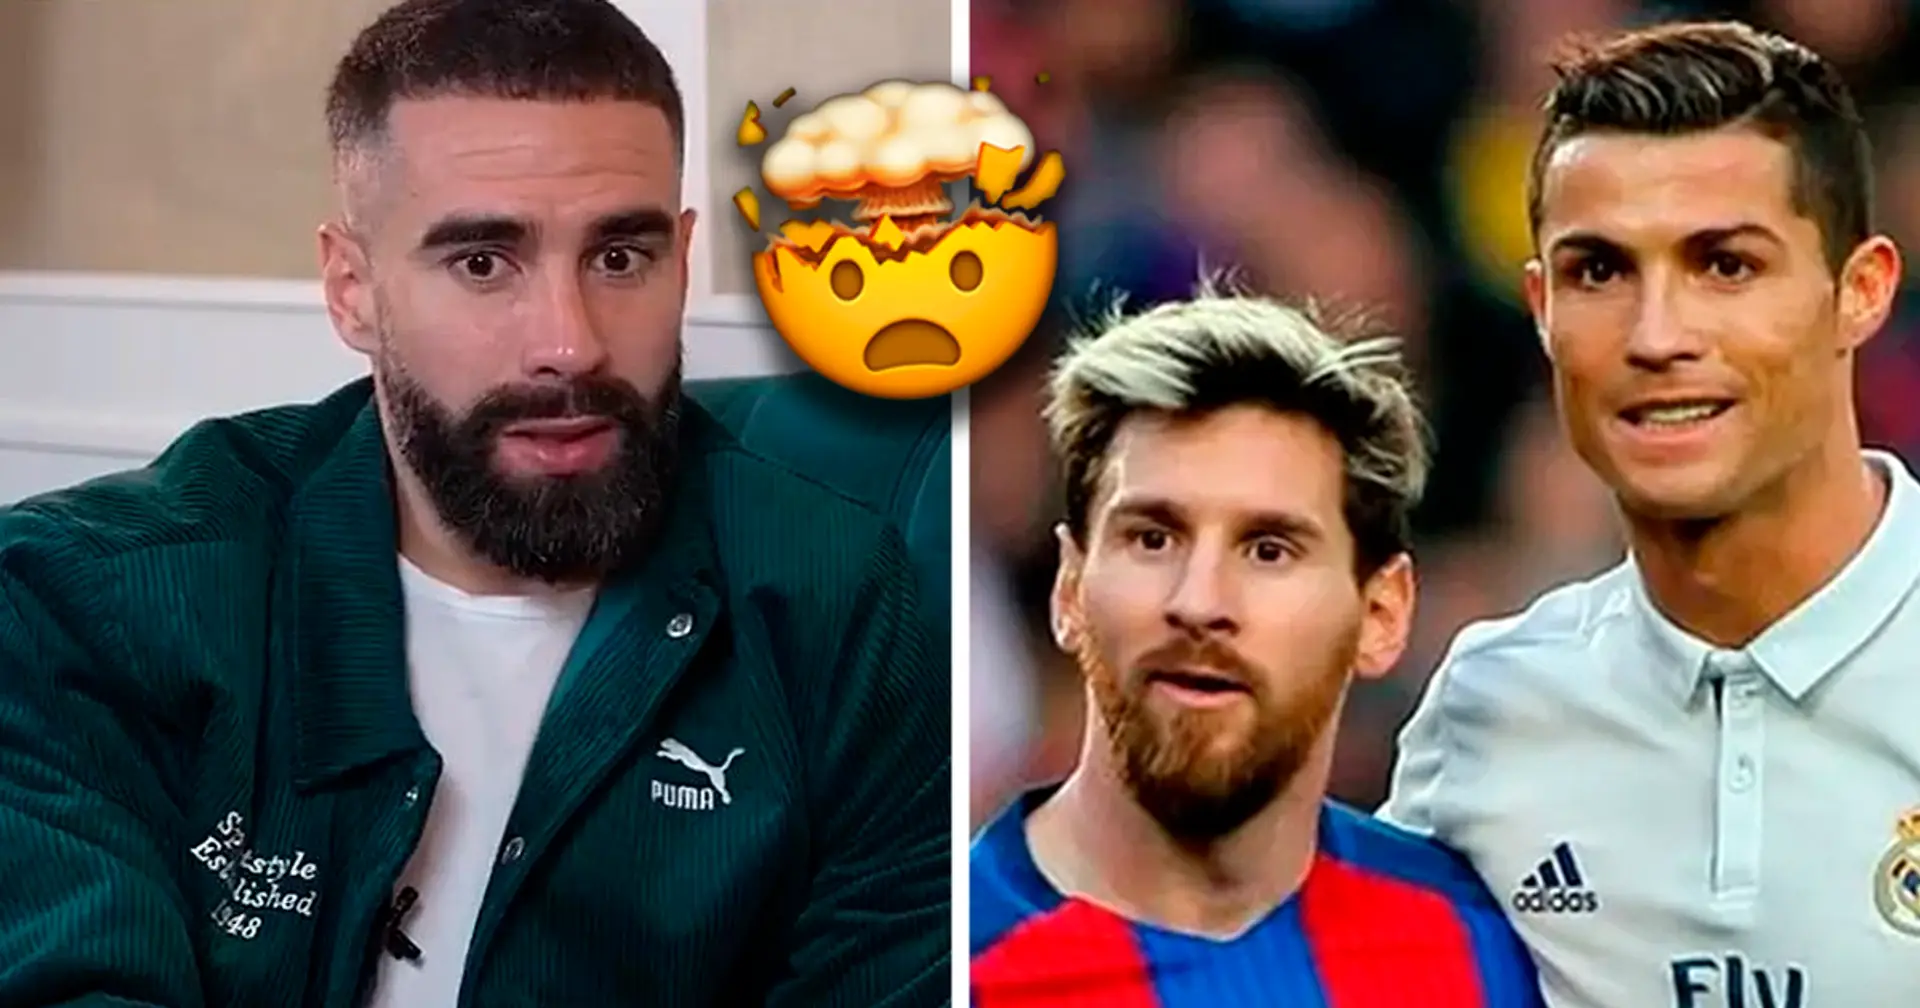 Who is greater - Messi or Ronaldo? Dani Carvajal gives a shocking answer as a Real Madrid player